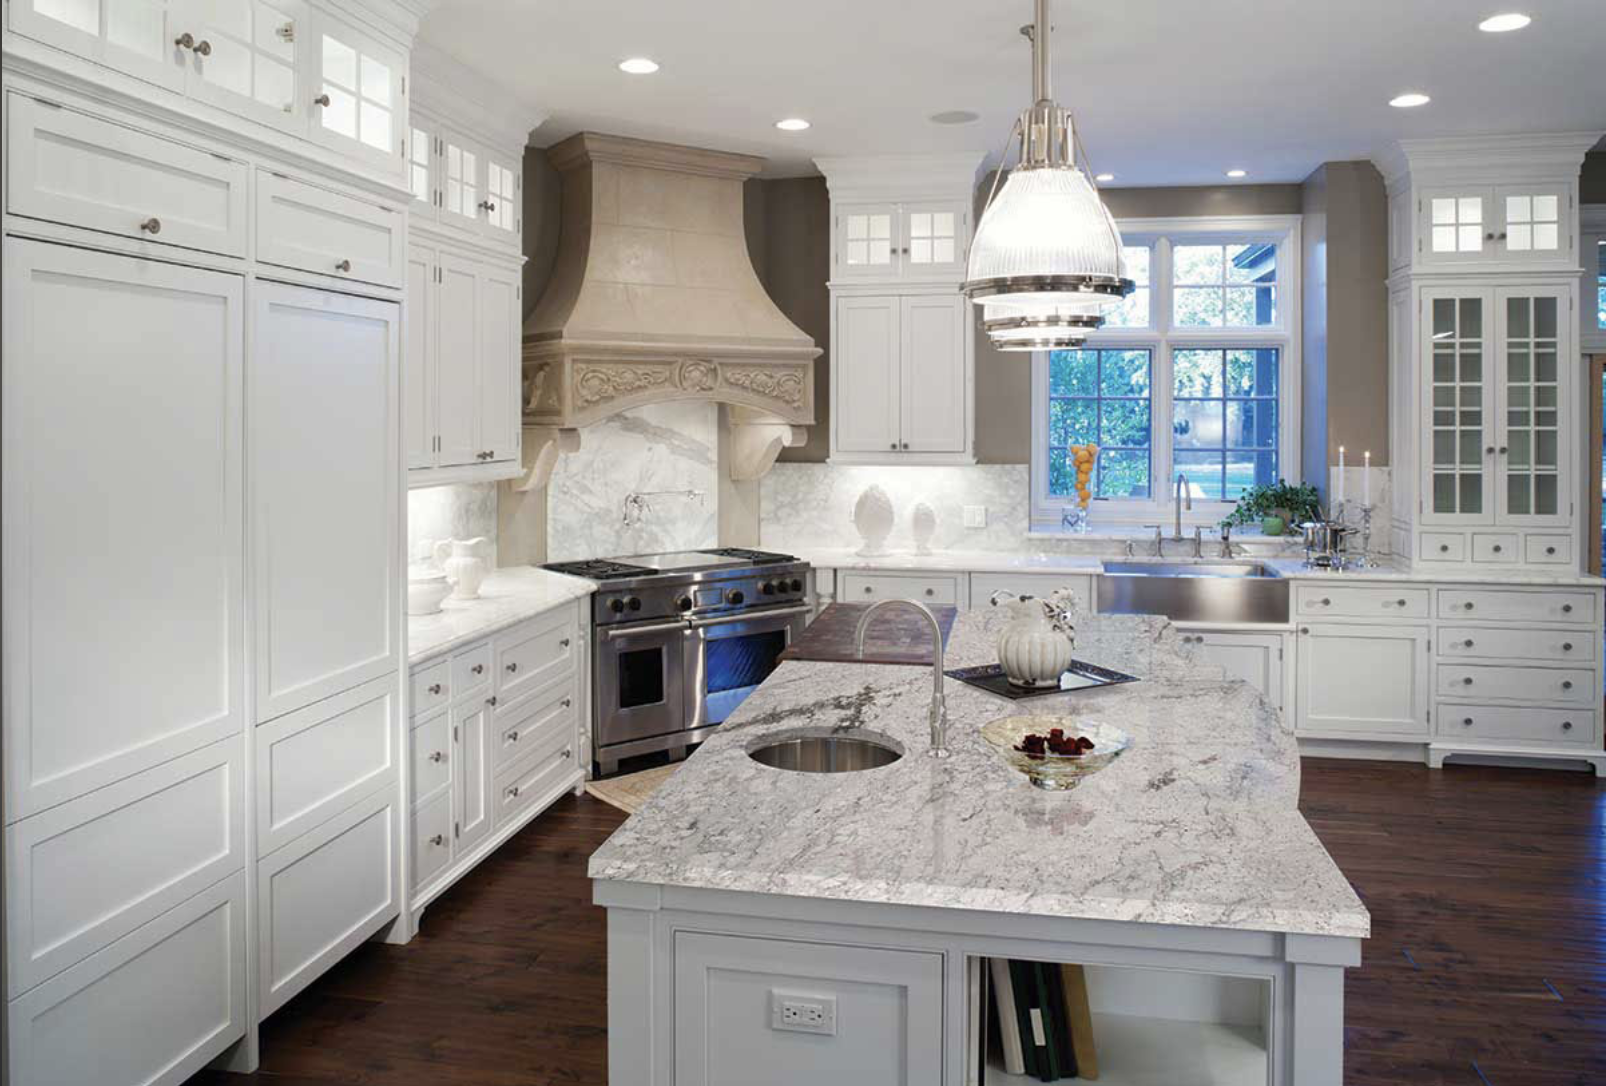 Pros And Cons Of Granite Countertops, Pros And Cons Of Painting Granite Countertops